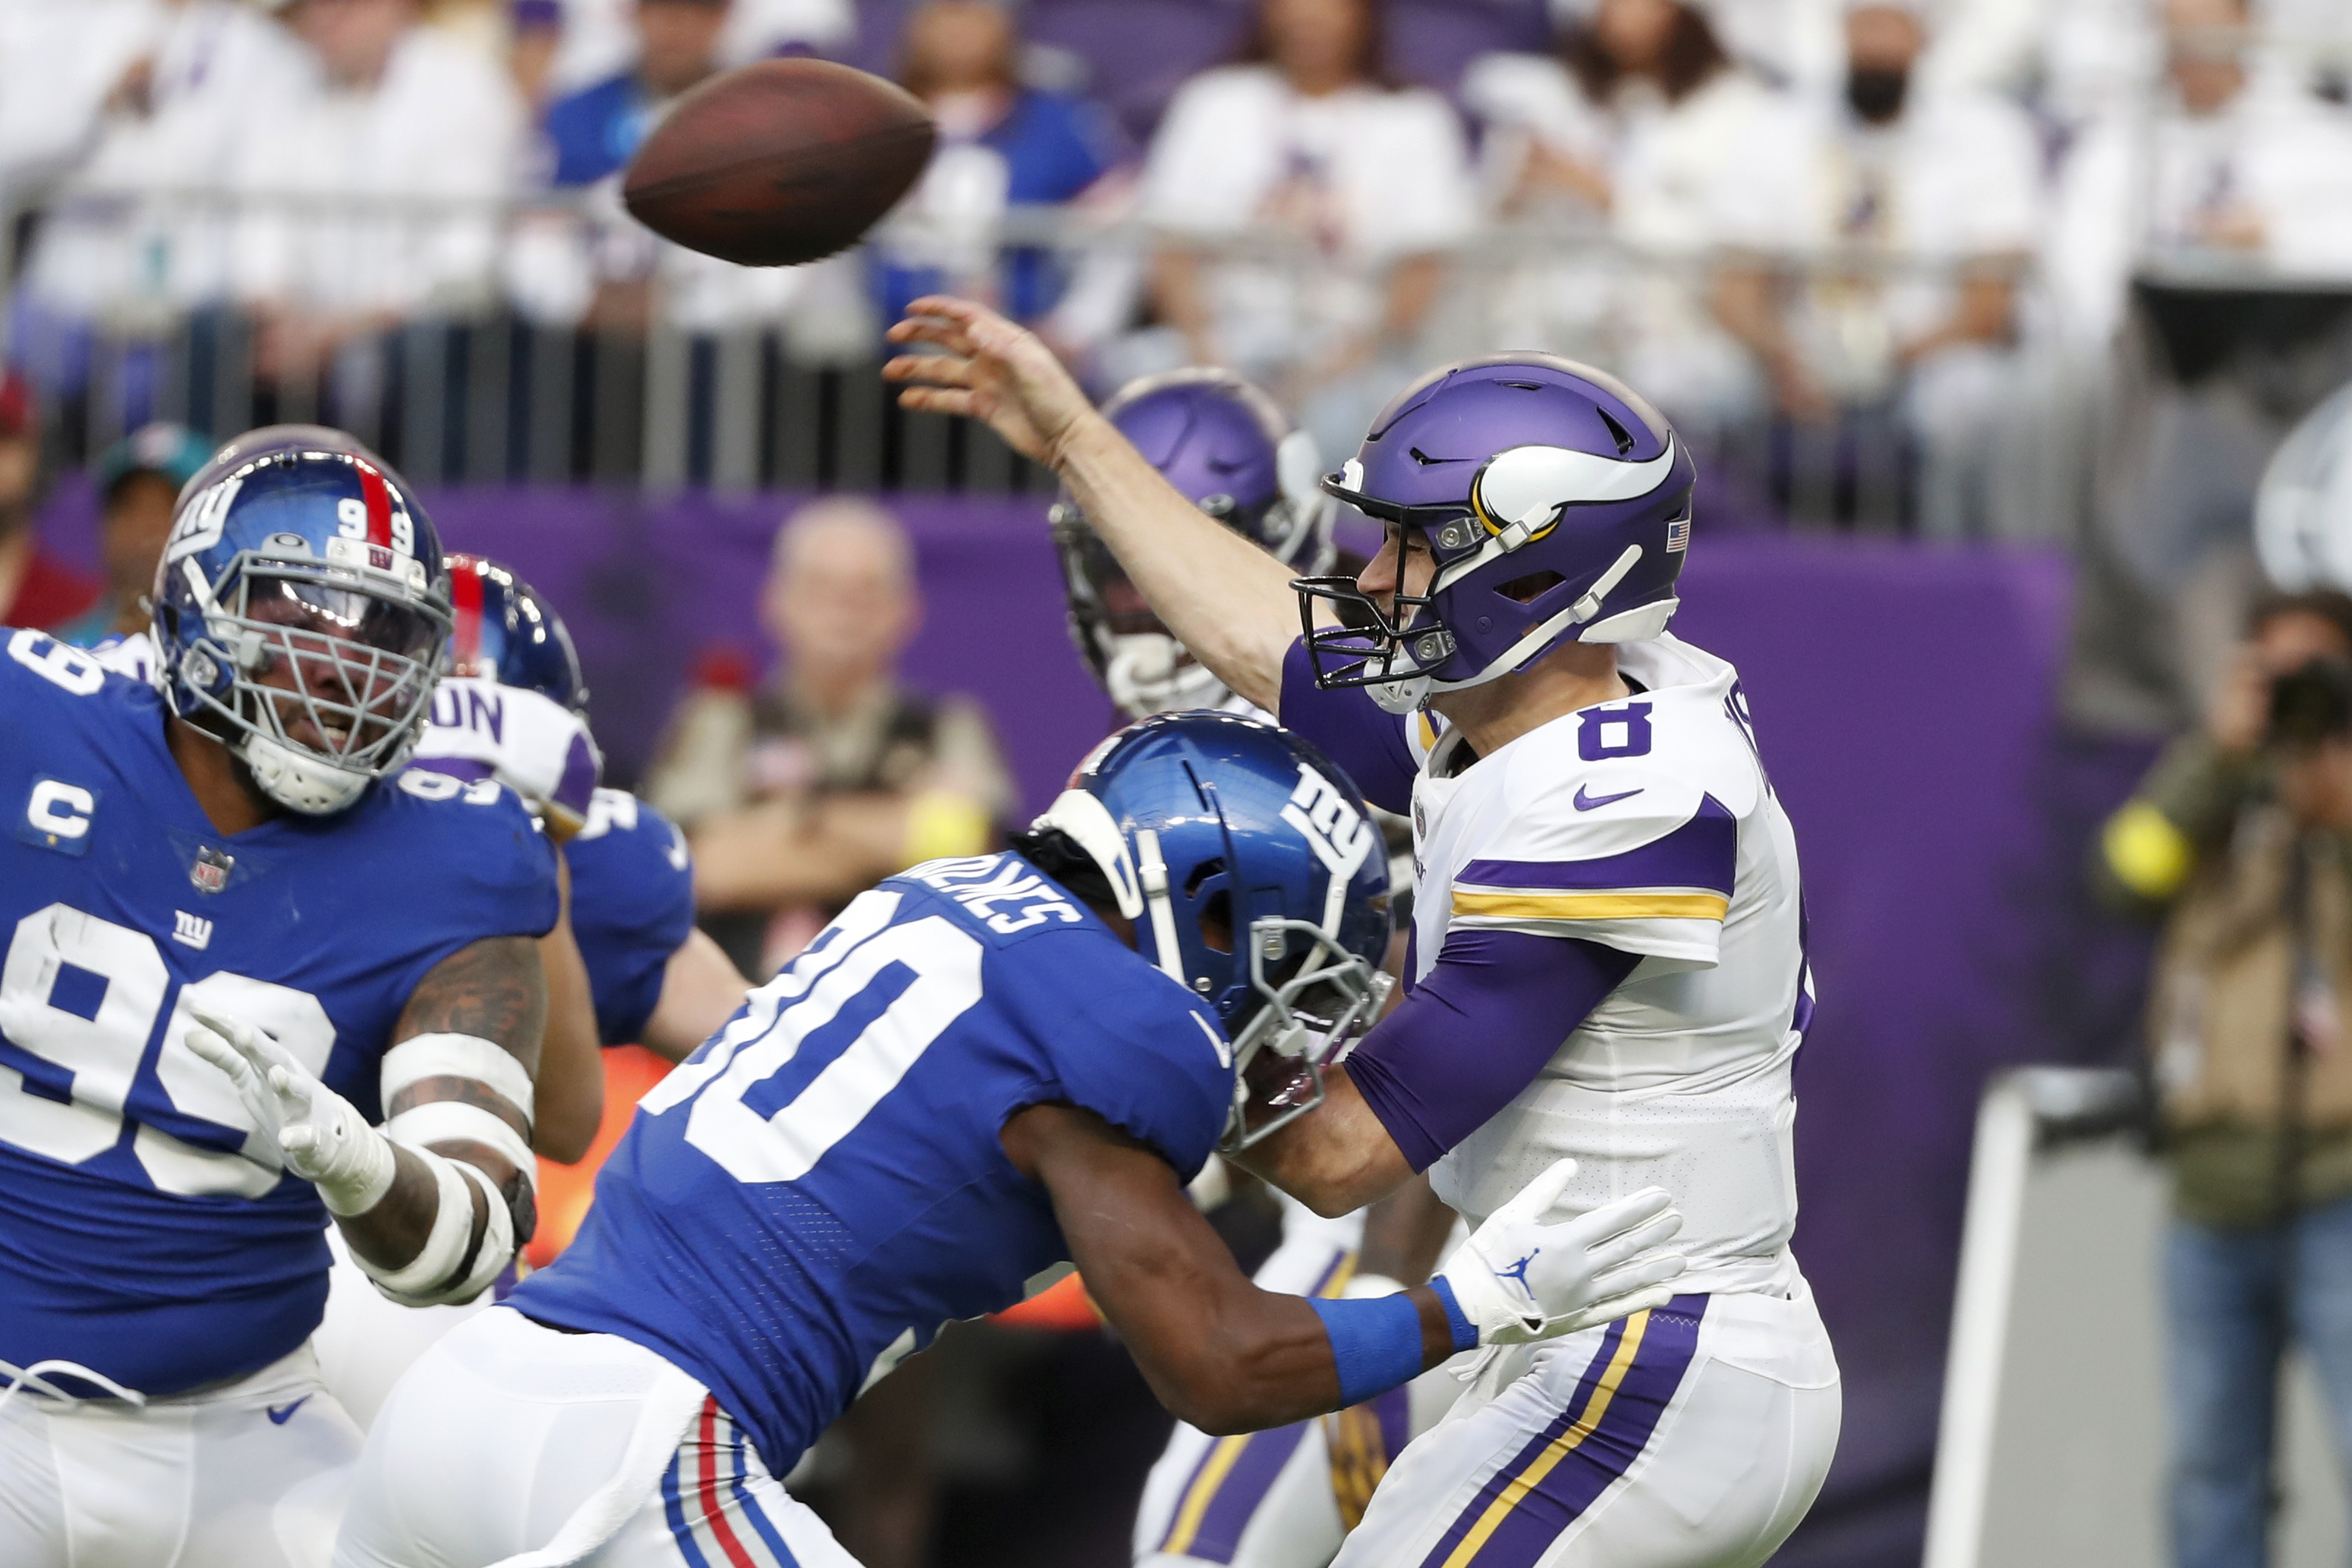 Giants-Vikings Wild Card: NFL Playoffs live updates and score